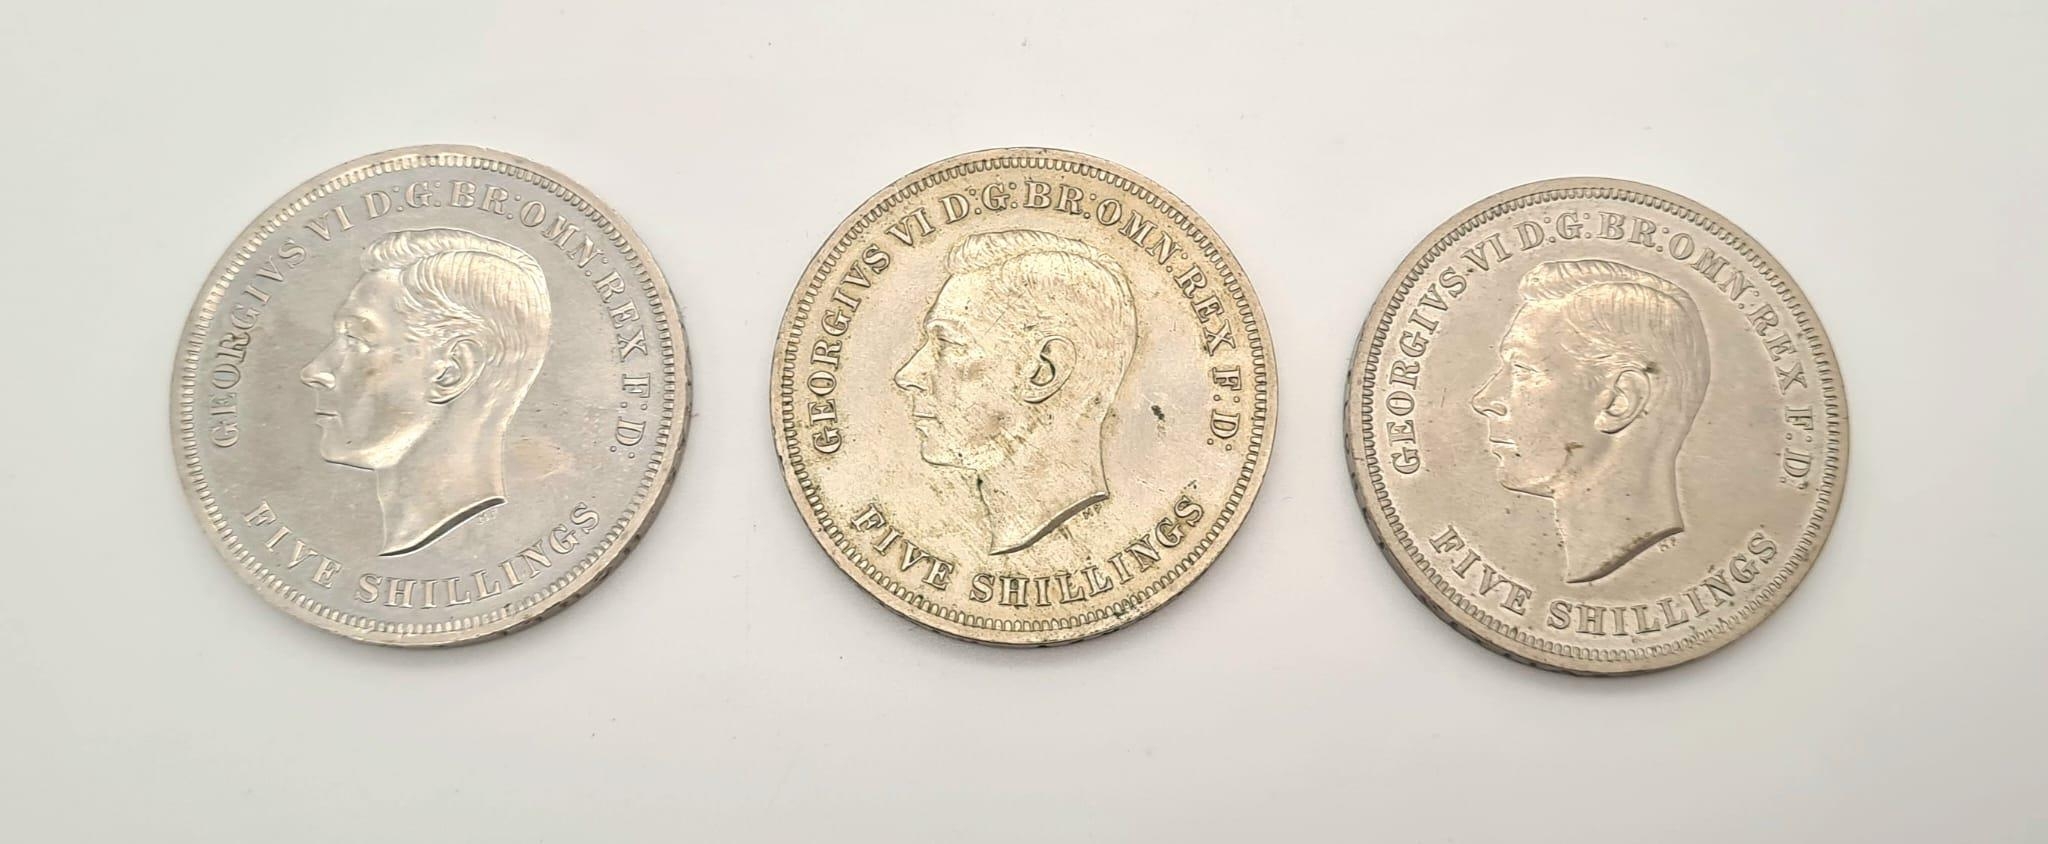 Three Festival of Britain 1951 George VI Crowns. Two in original boxes. Please see photos for - Image 3 of 6